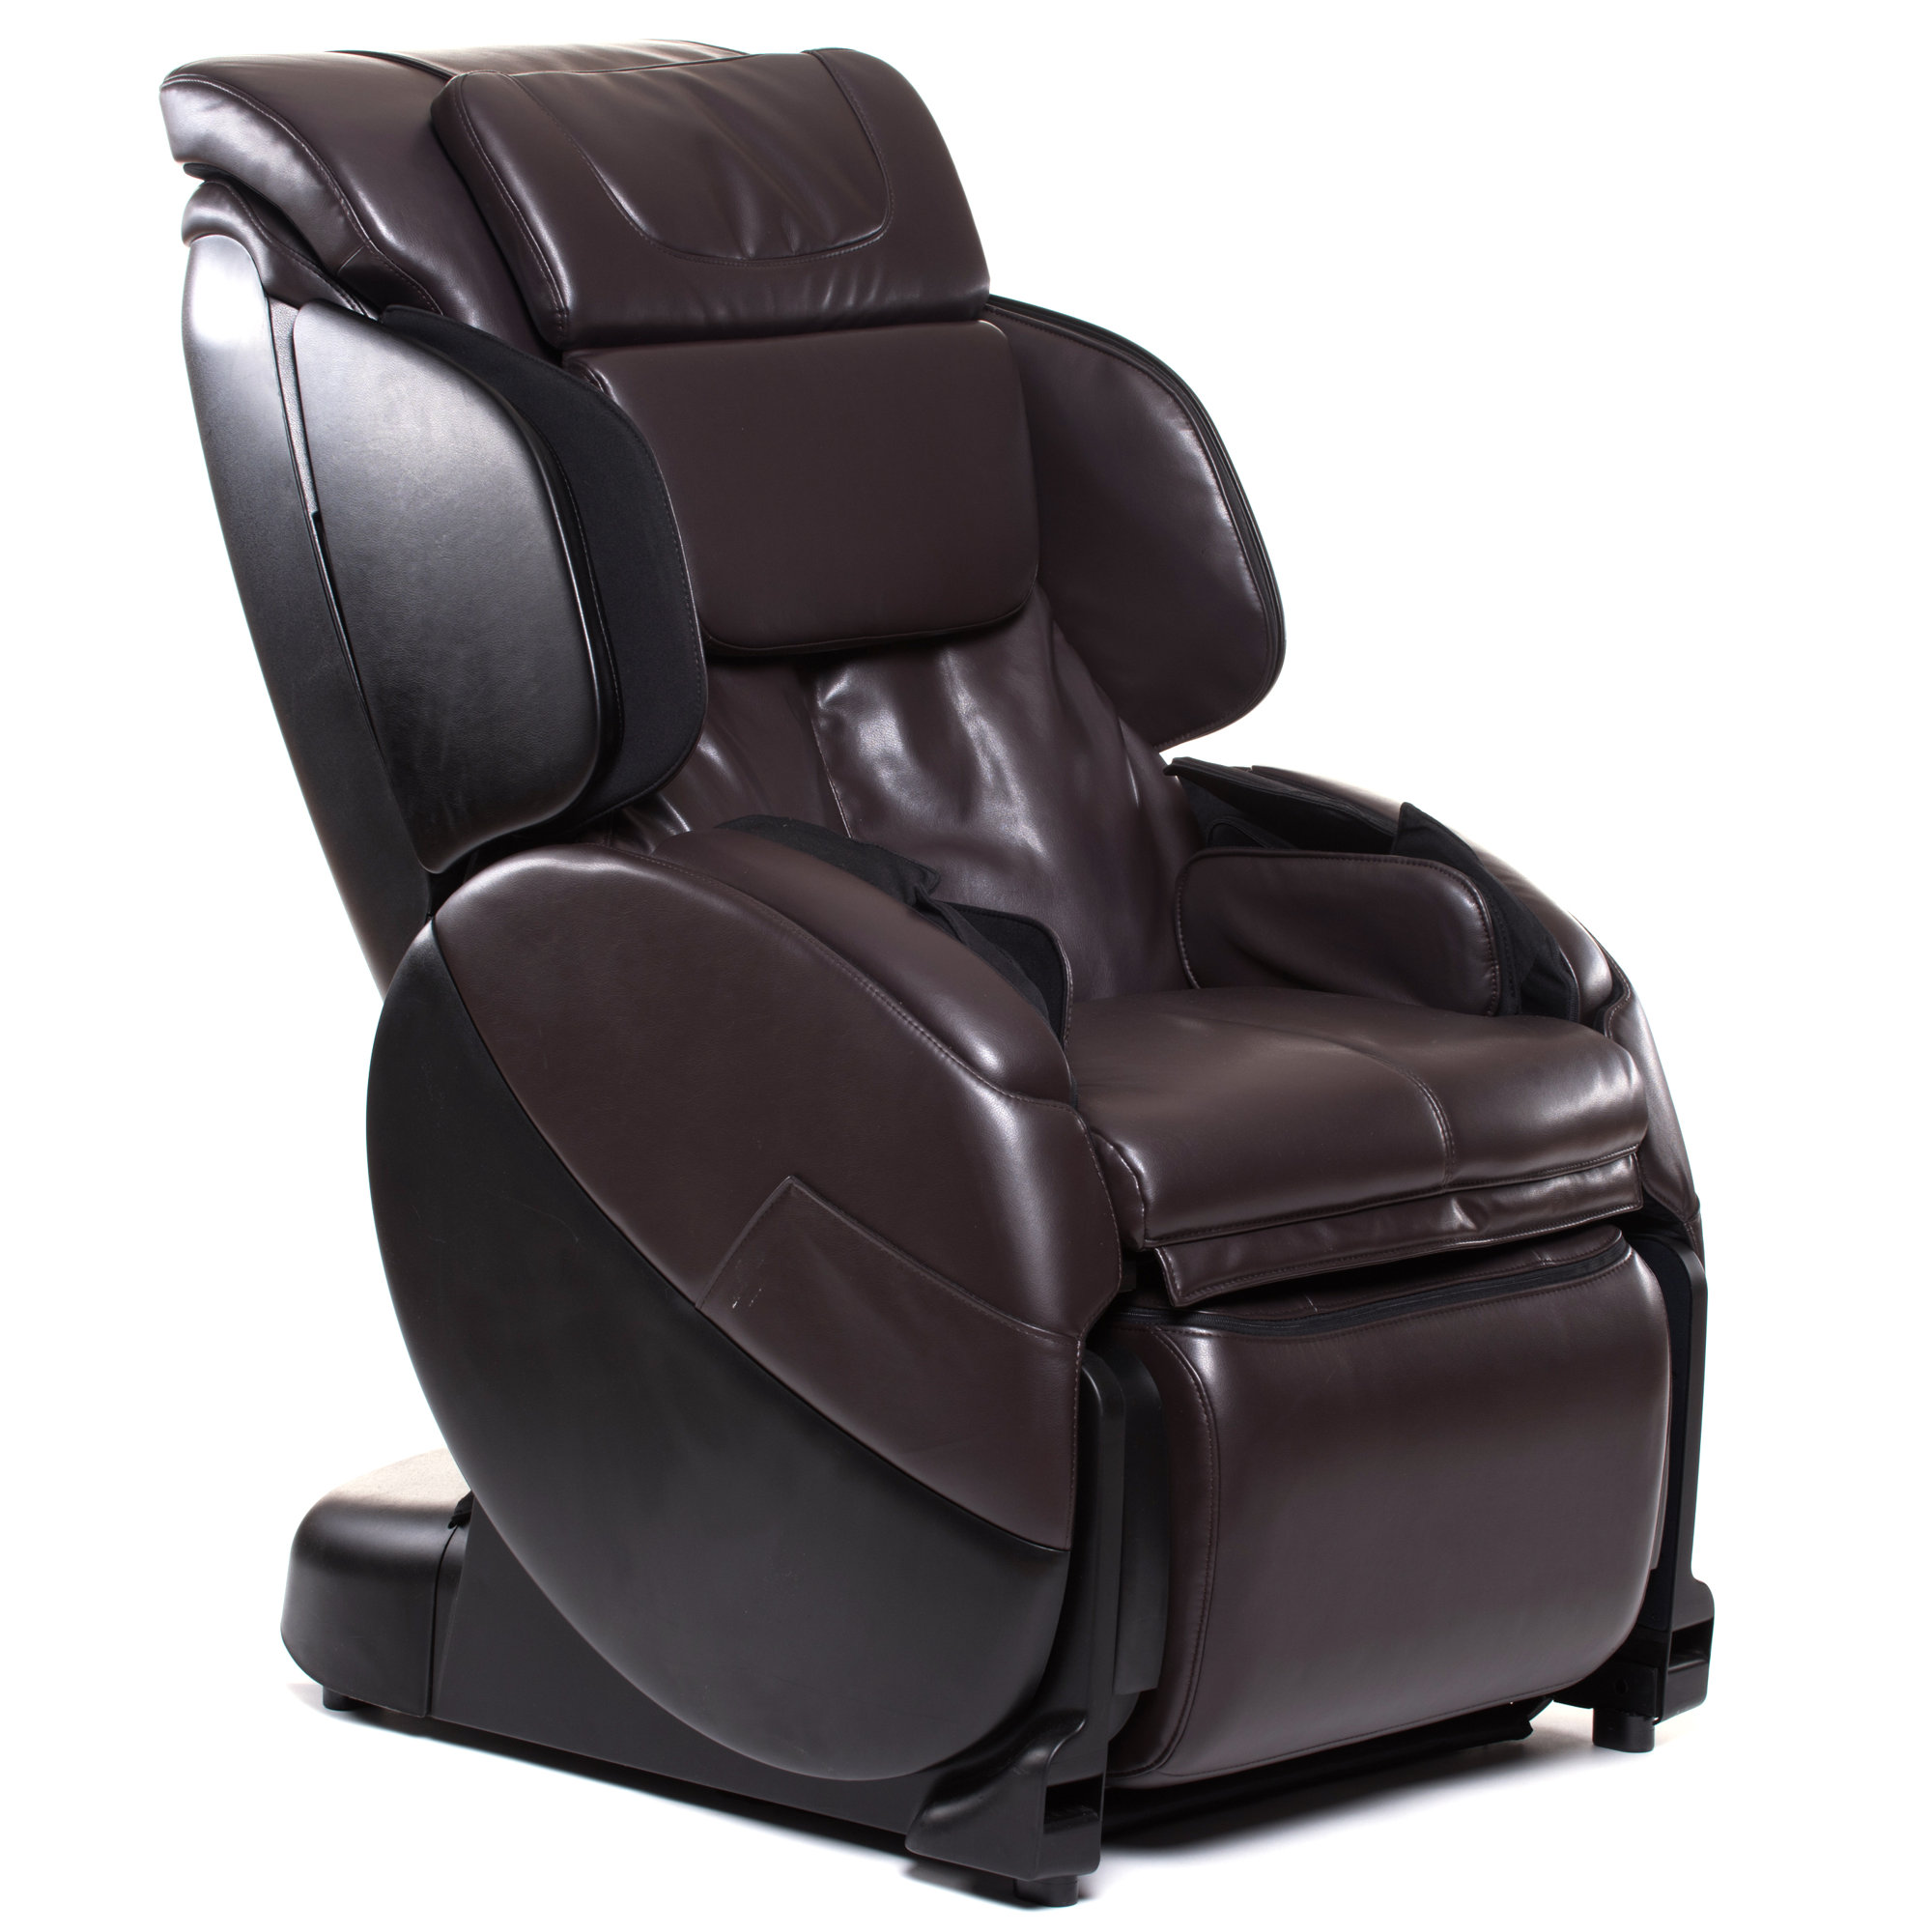 Human Touch Bali Acutouch 80 Physical Therapy Robotic Massage Chair Wayfair